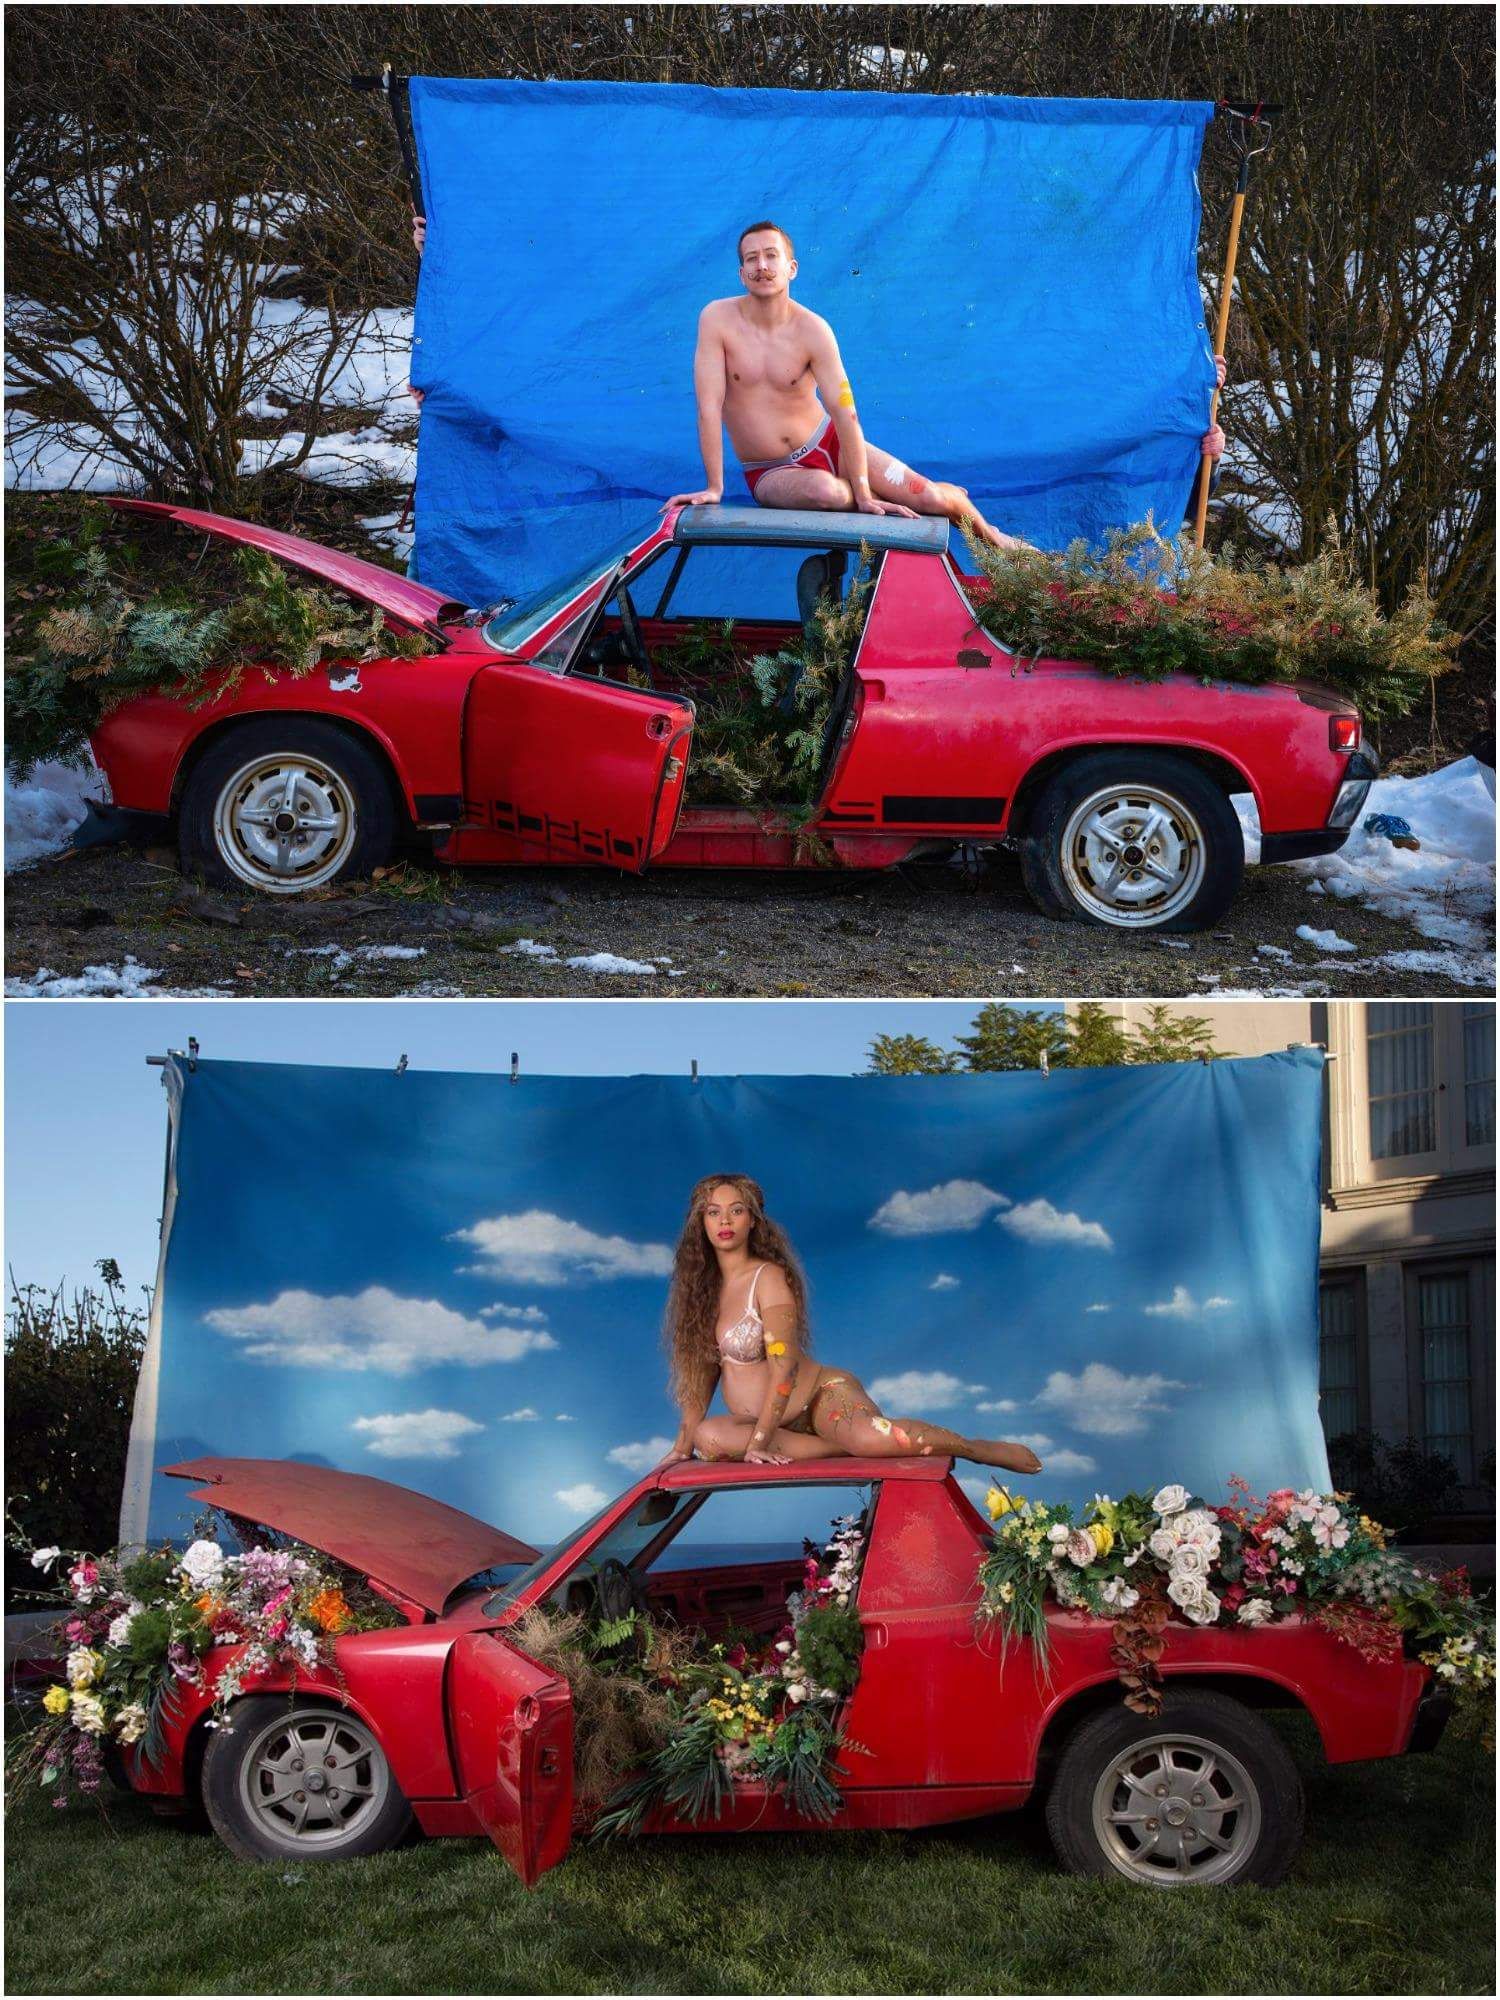 My friend has the same Porsche that Beyonce used for her pregnancy announcement photo shoot. He looks just like her, if she were a he from Idaho.